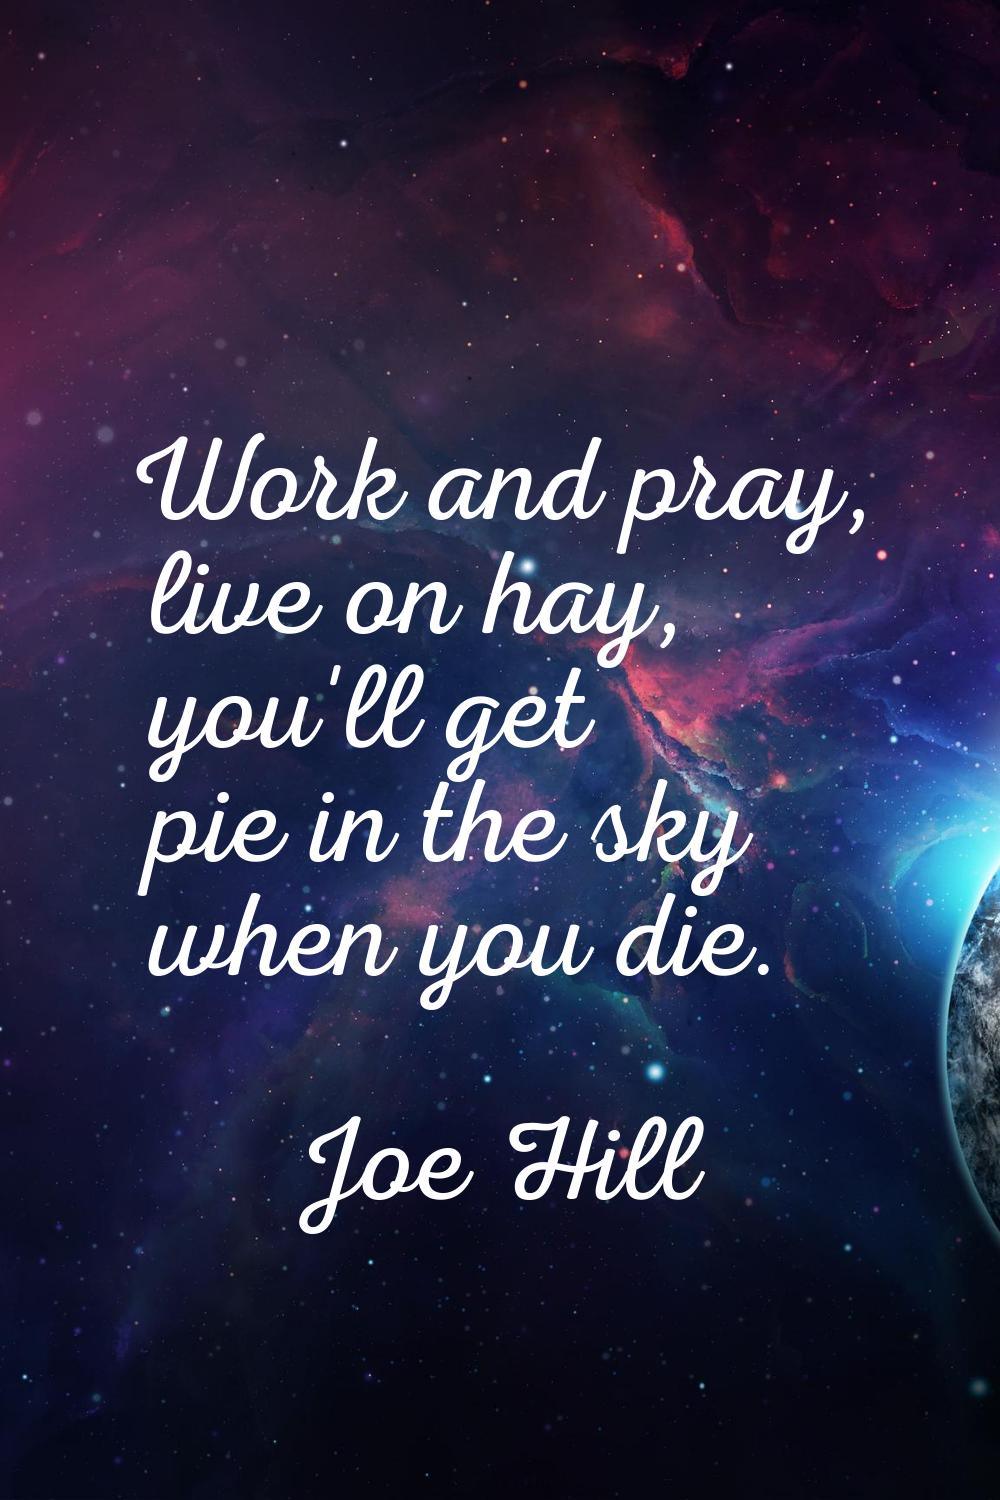 Work and pray, live on hay, you'll get pie in the sky when you die.